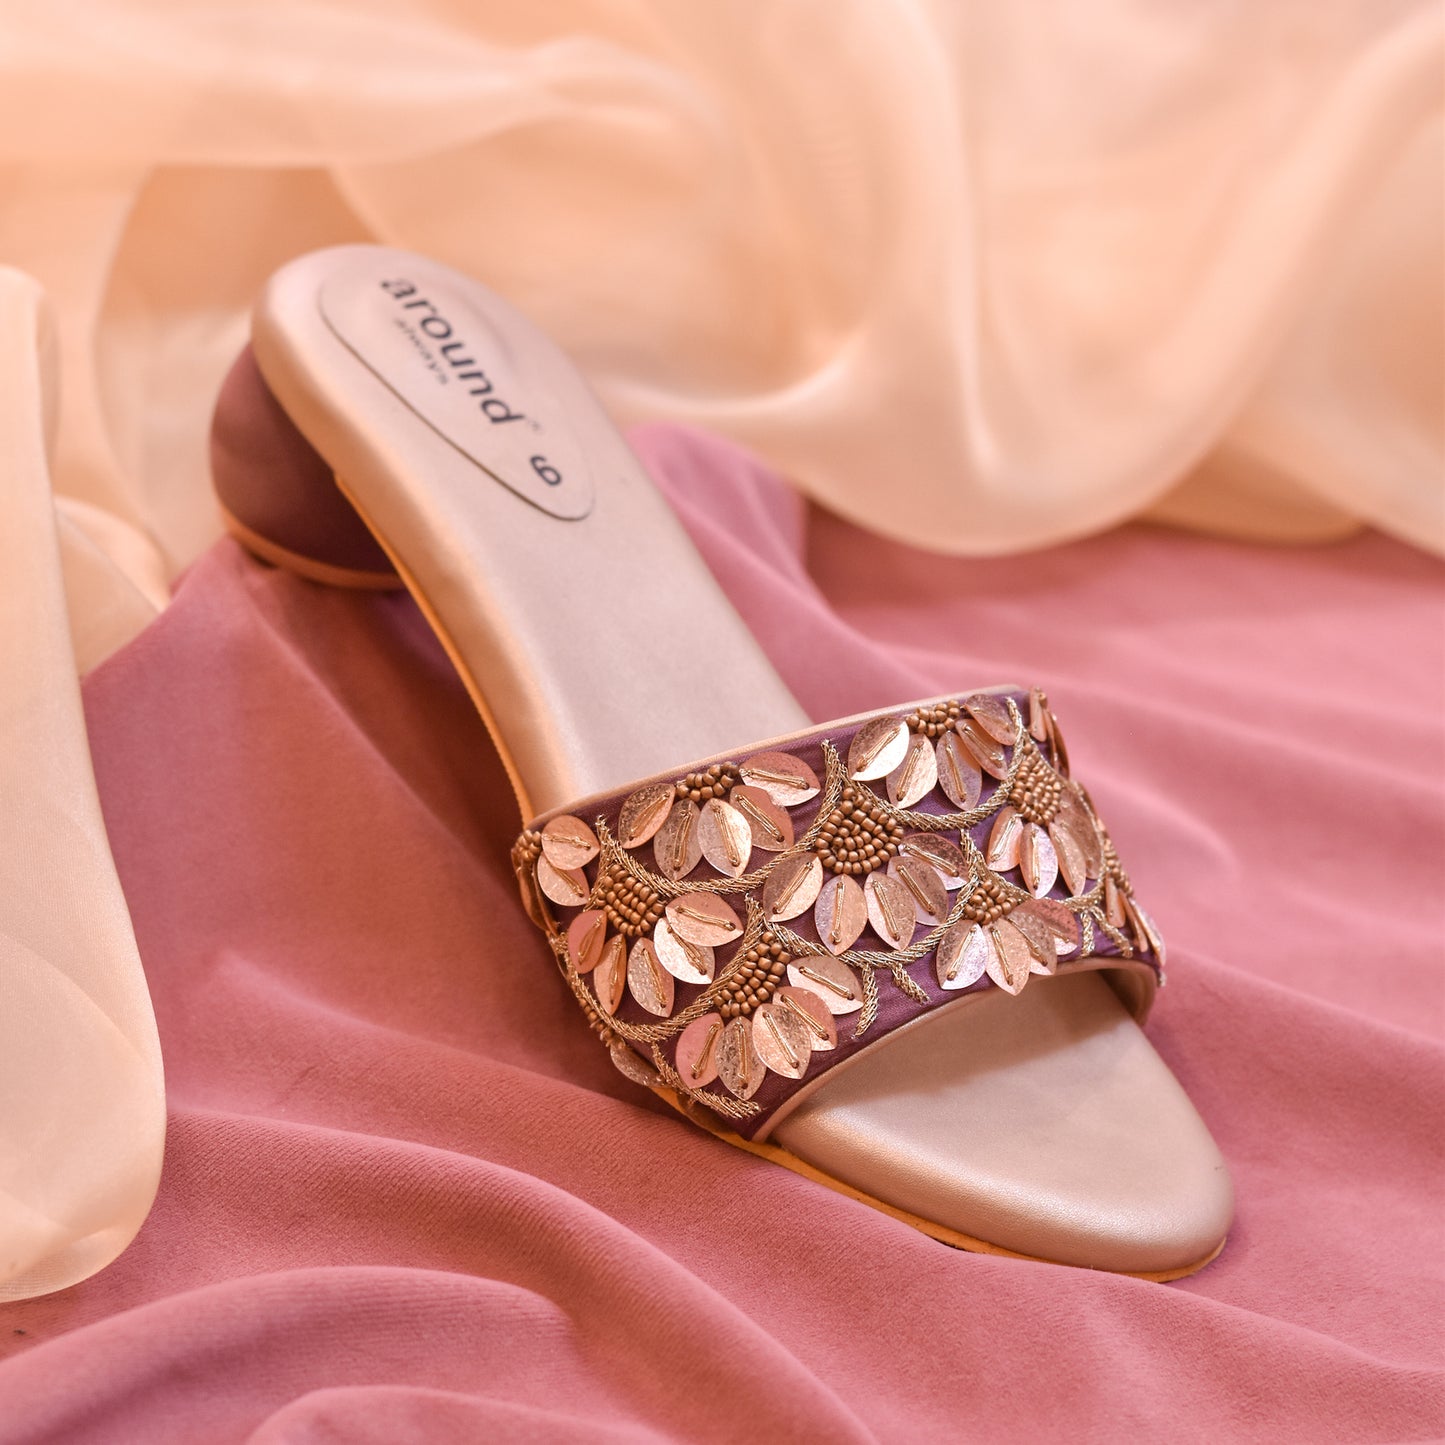 Premium and stylish embroidered occasion wear sandals